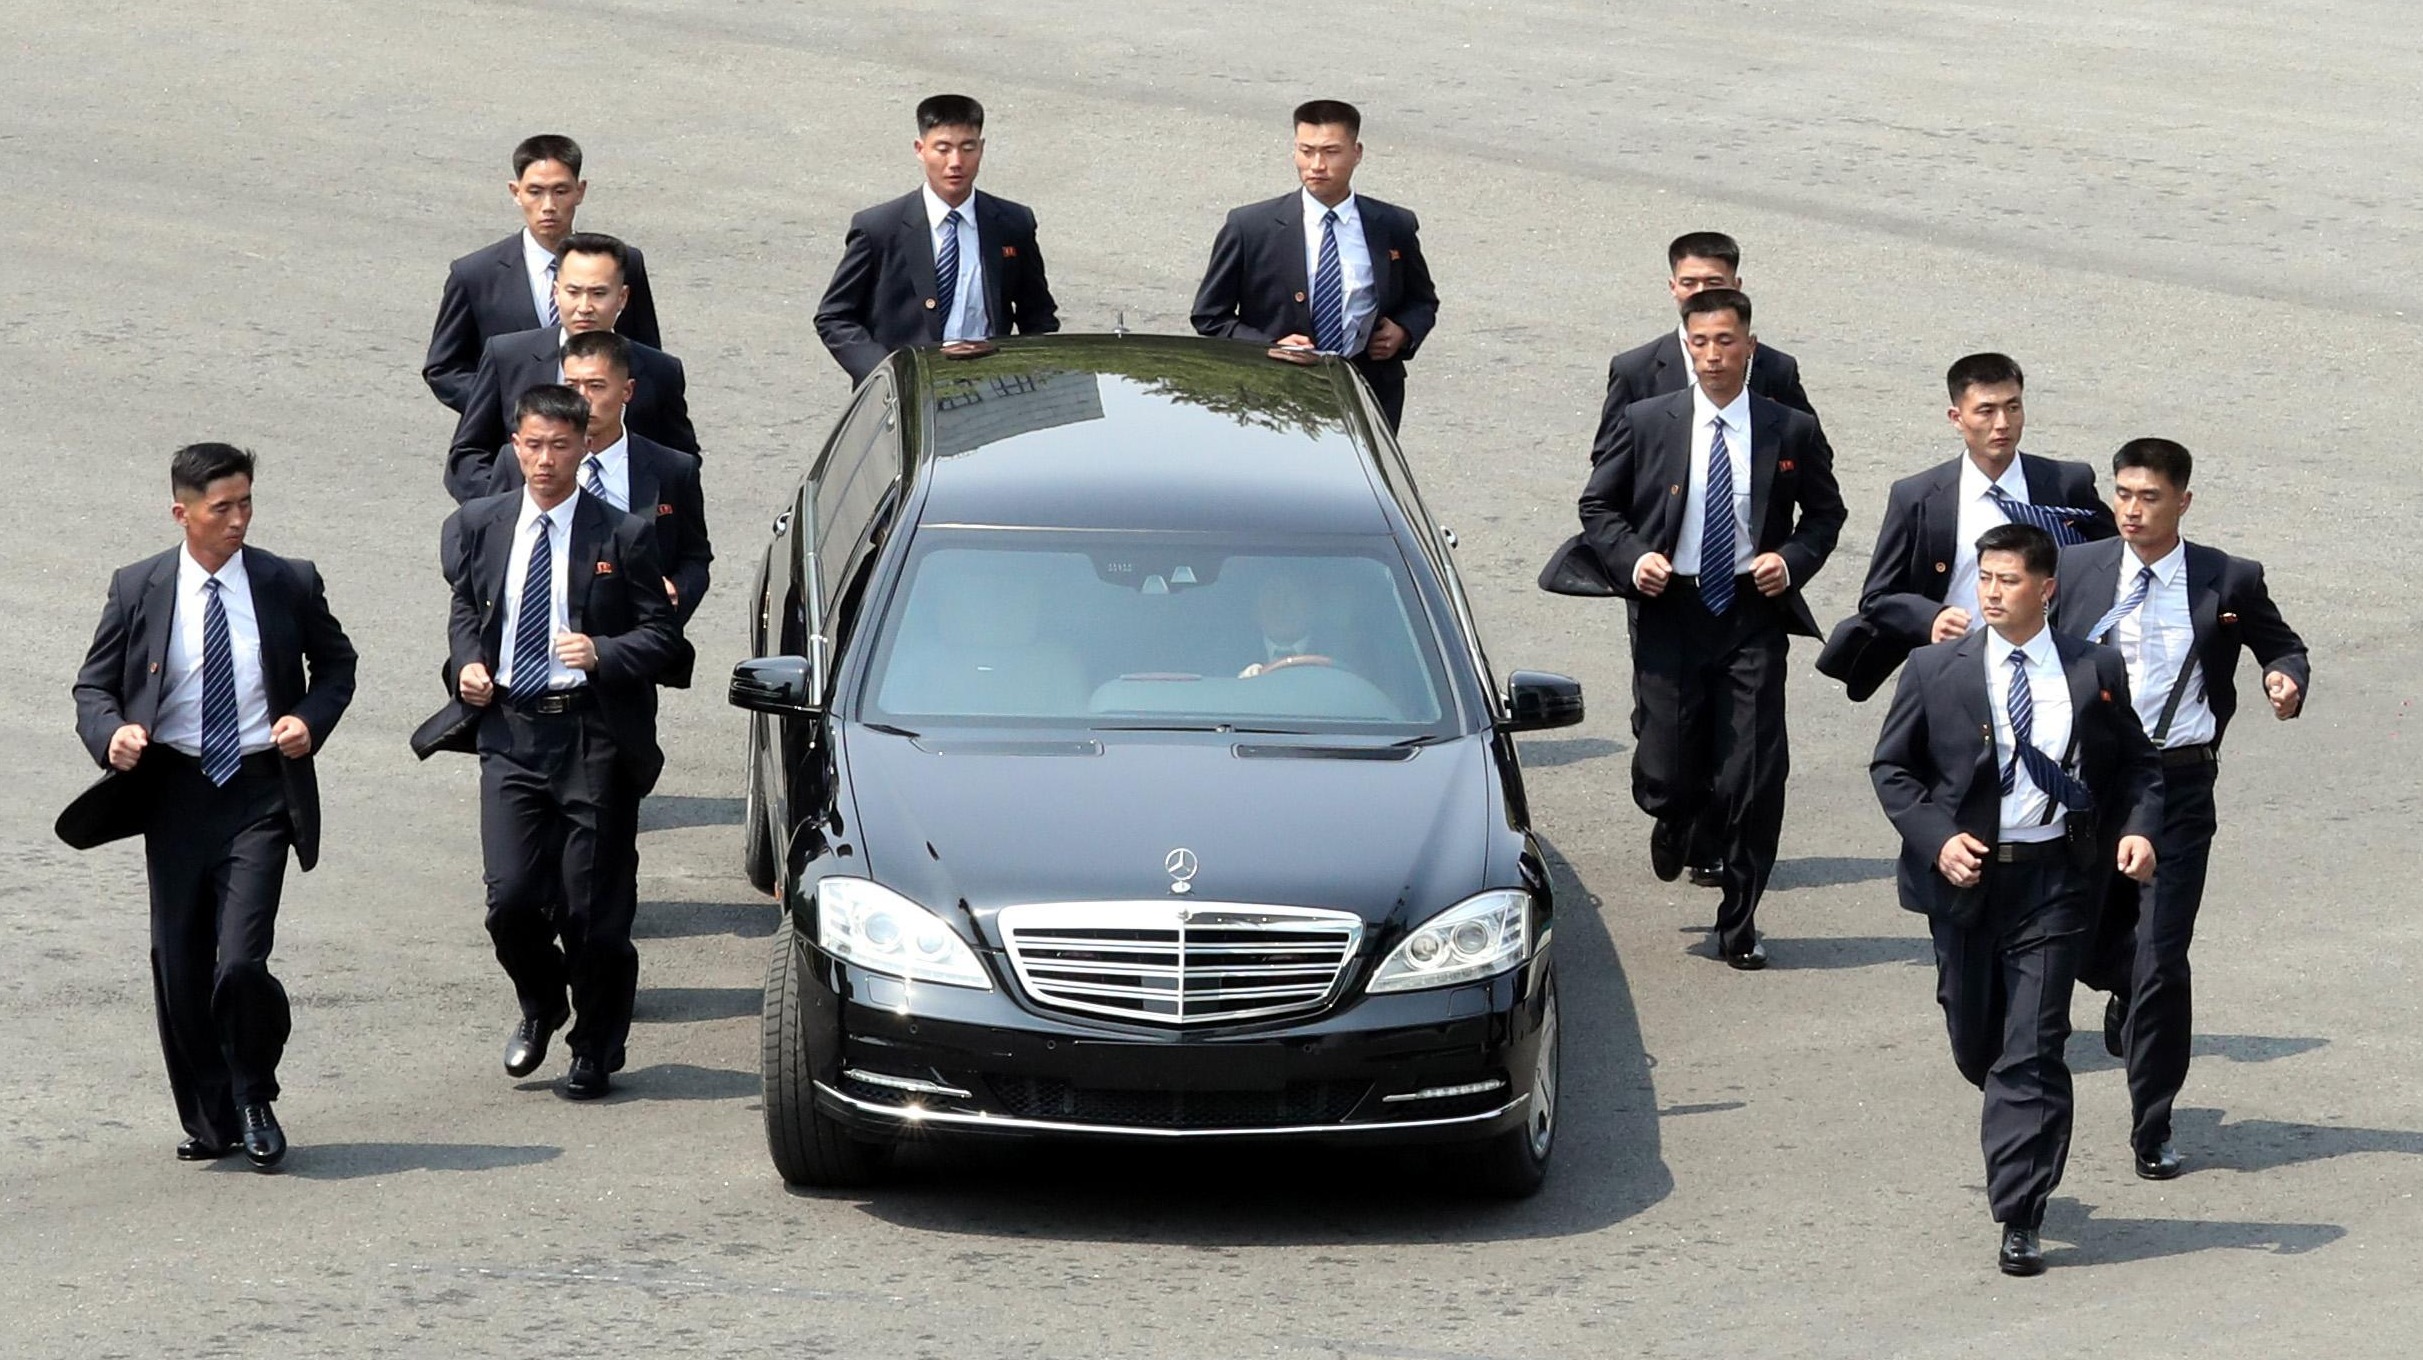 Kim is surrounded by a dozen security guards during talks in 2018 with South Korea